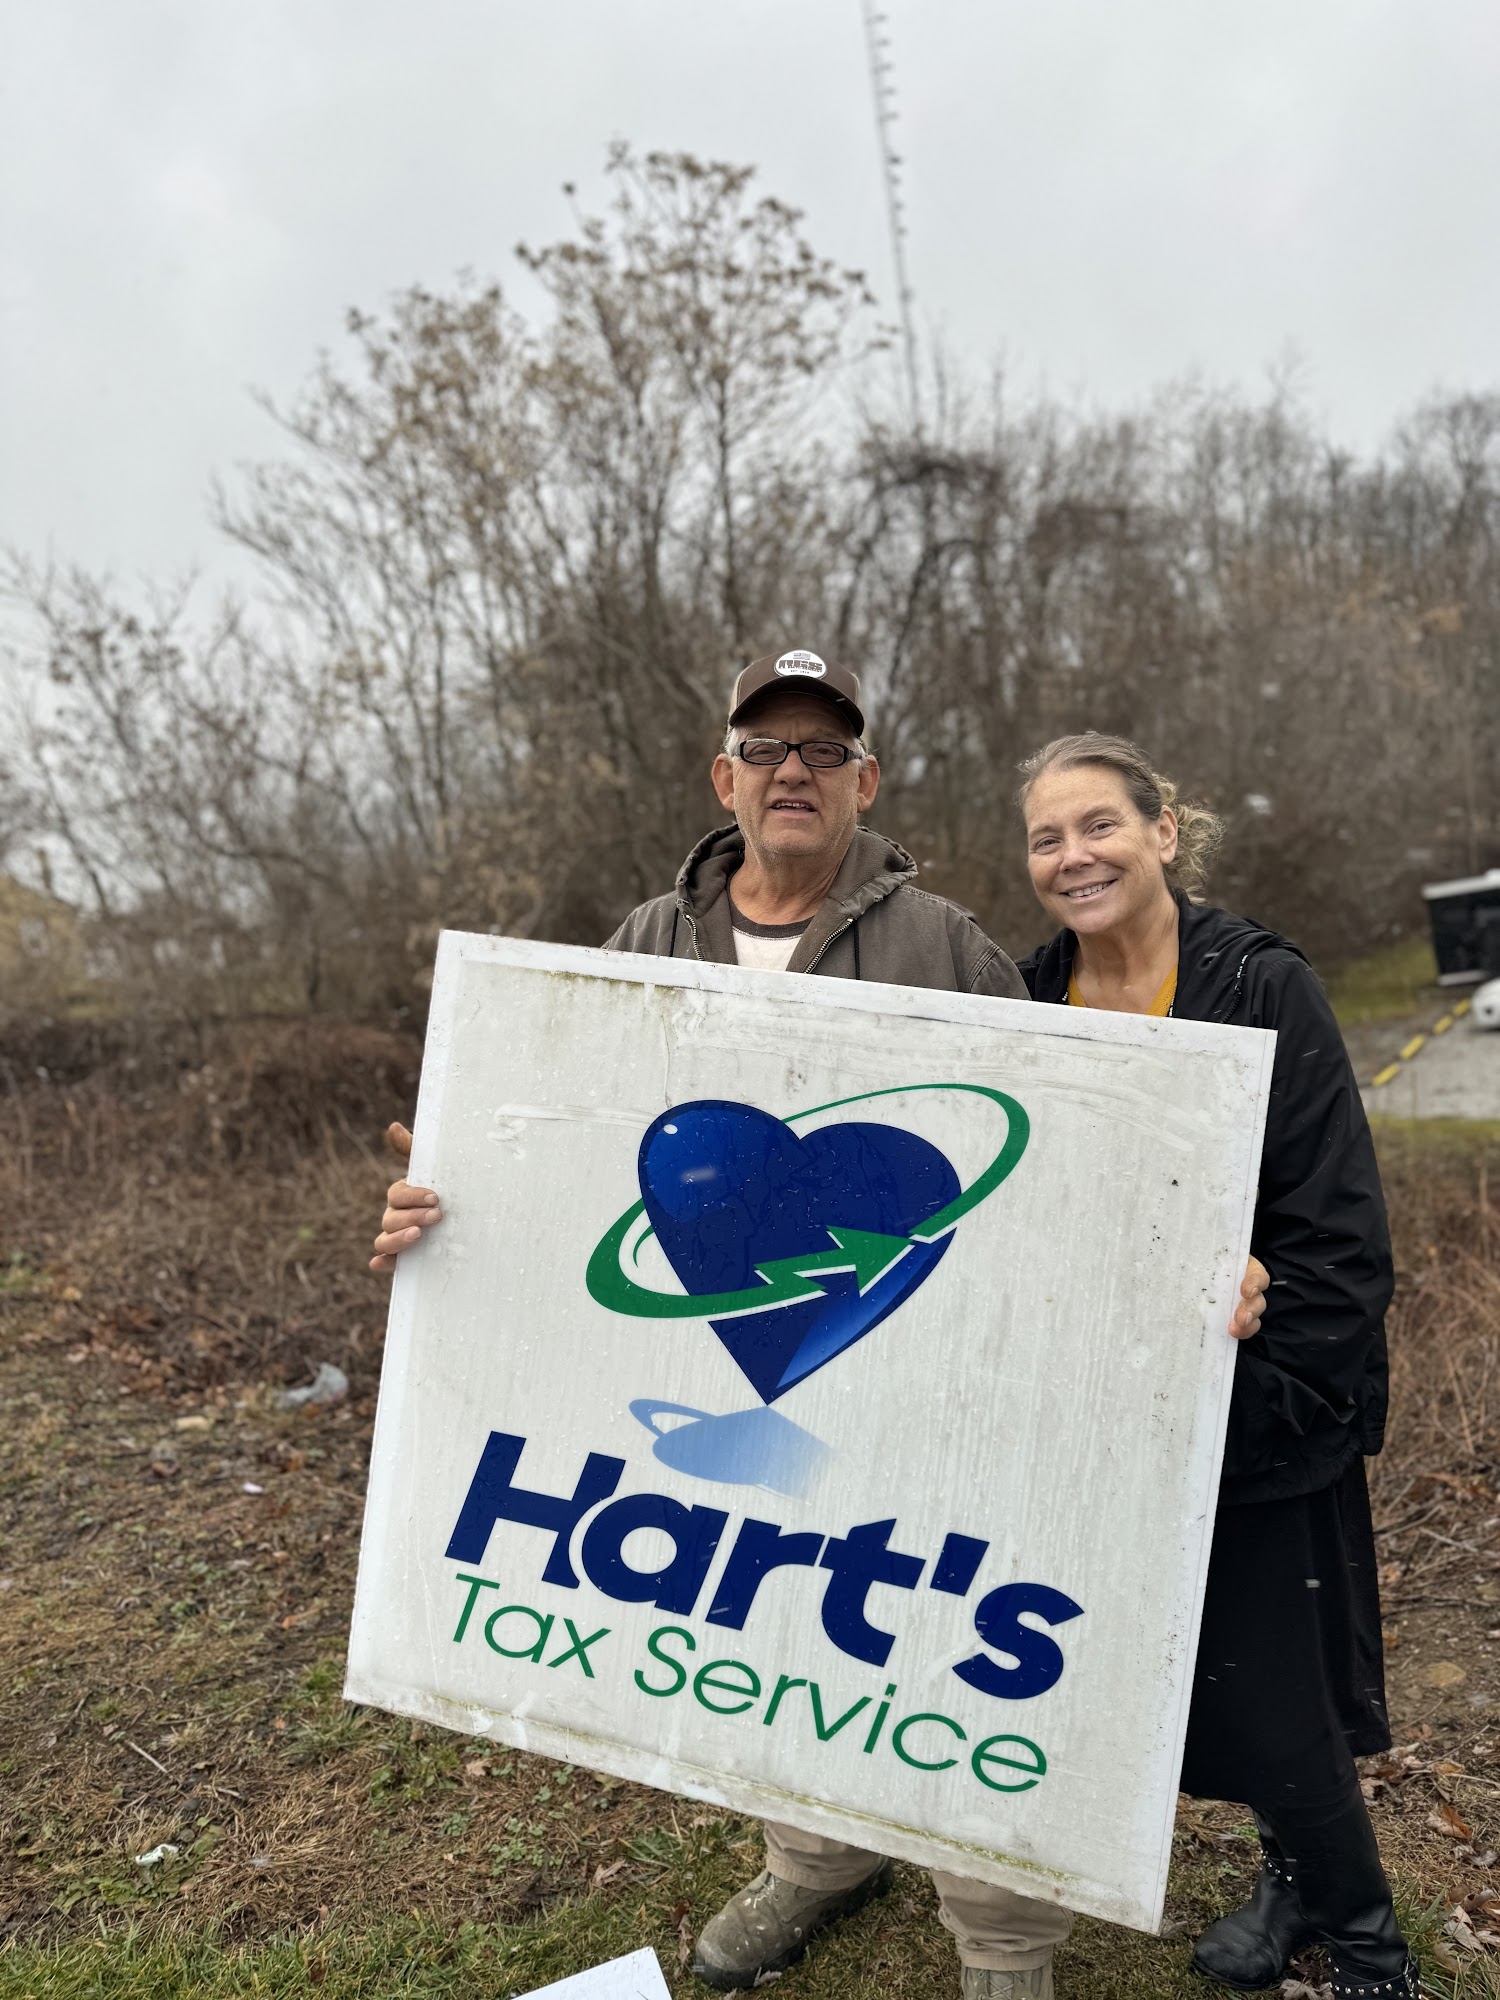 Hart's Tax Services